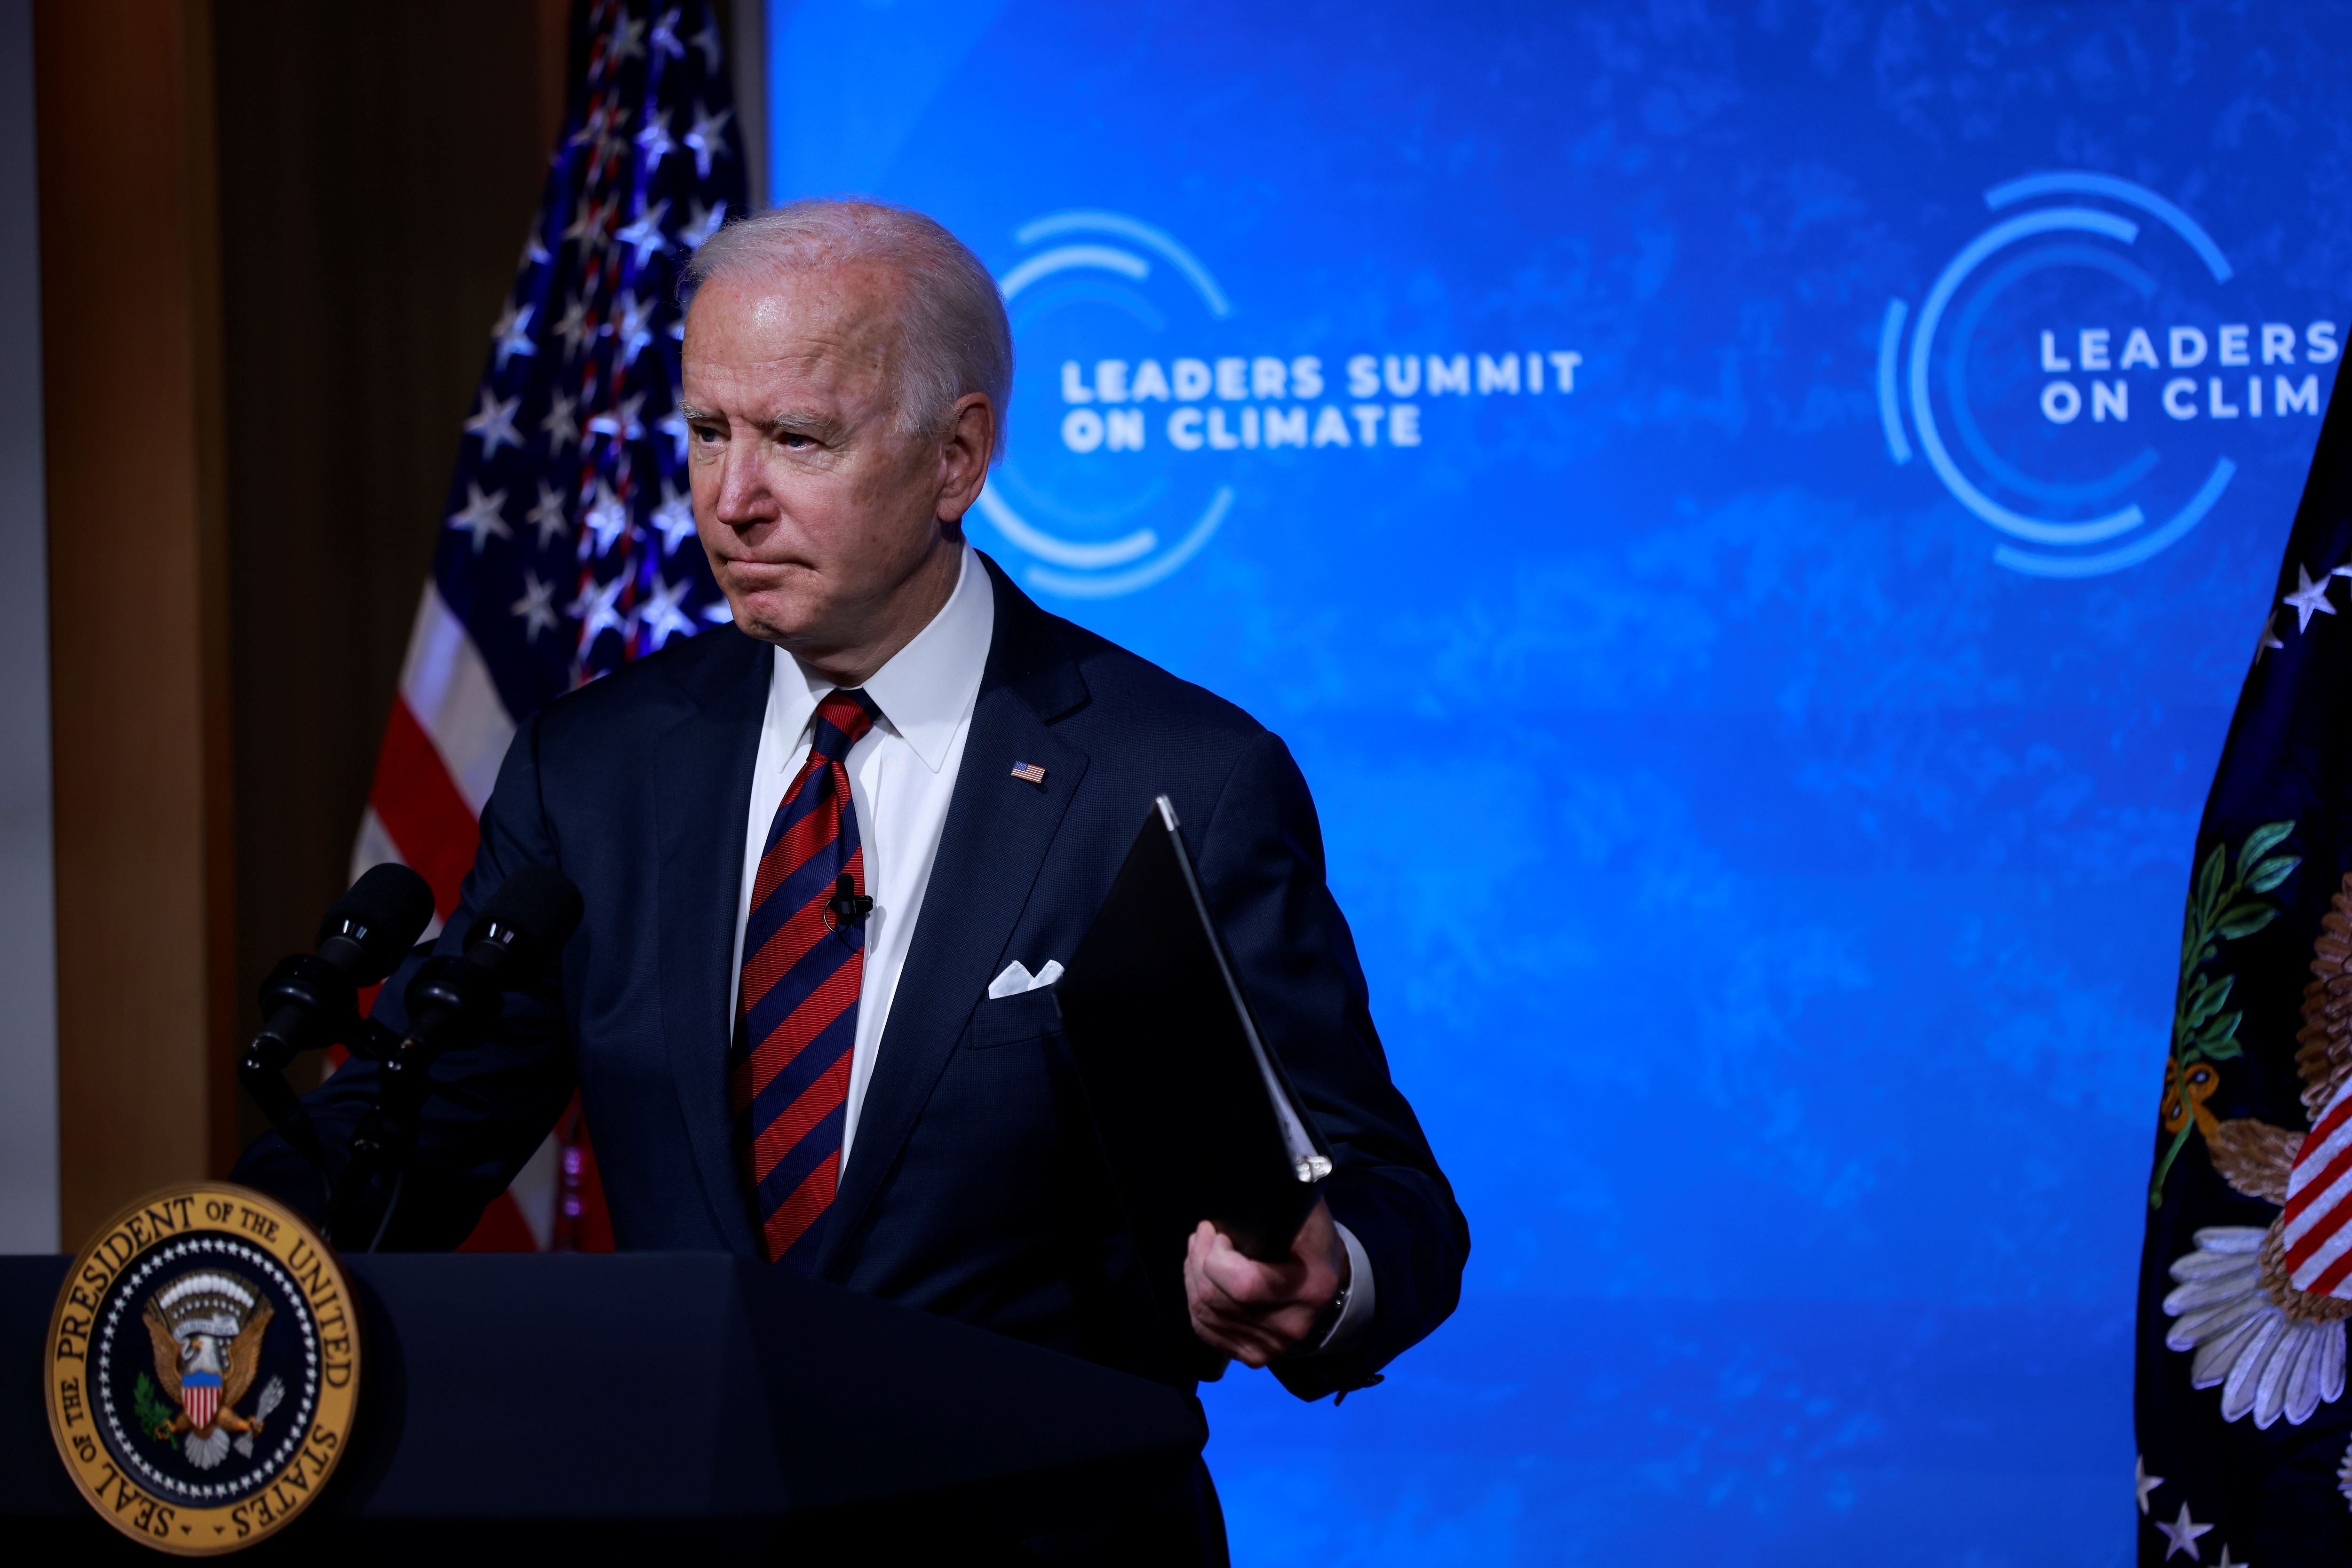 President Biden participates in a virtual climate summit at the White House